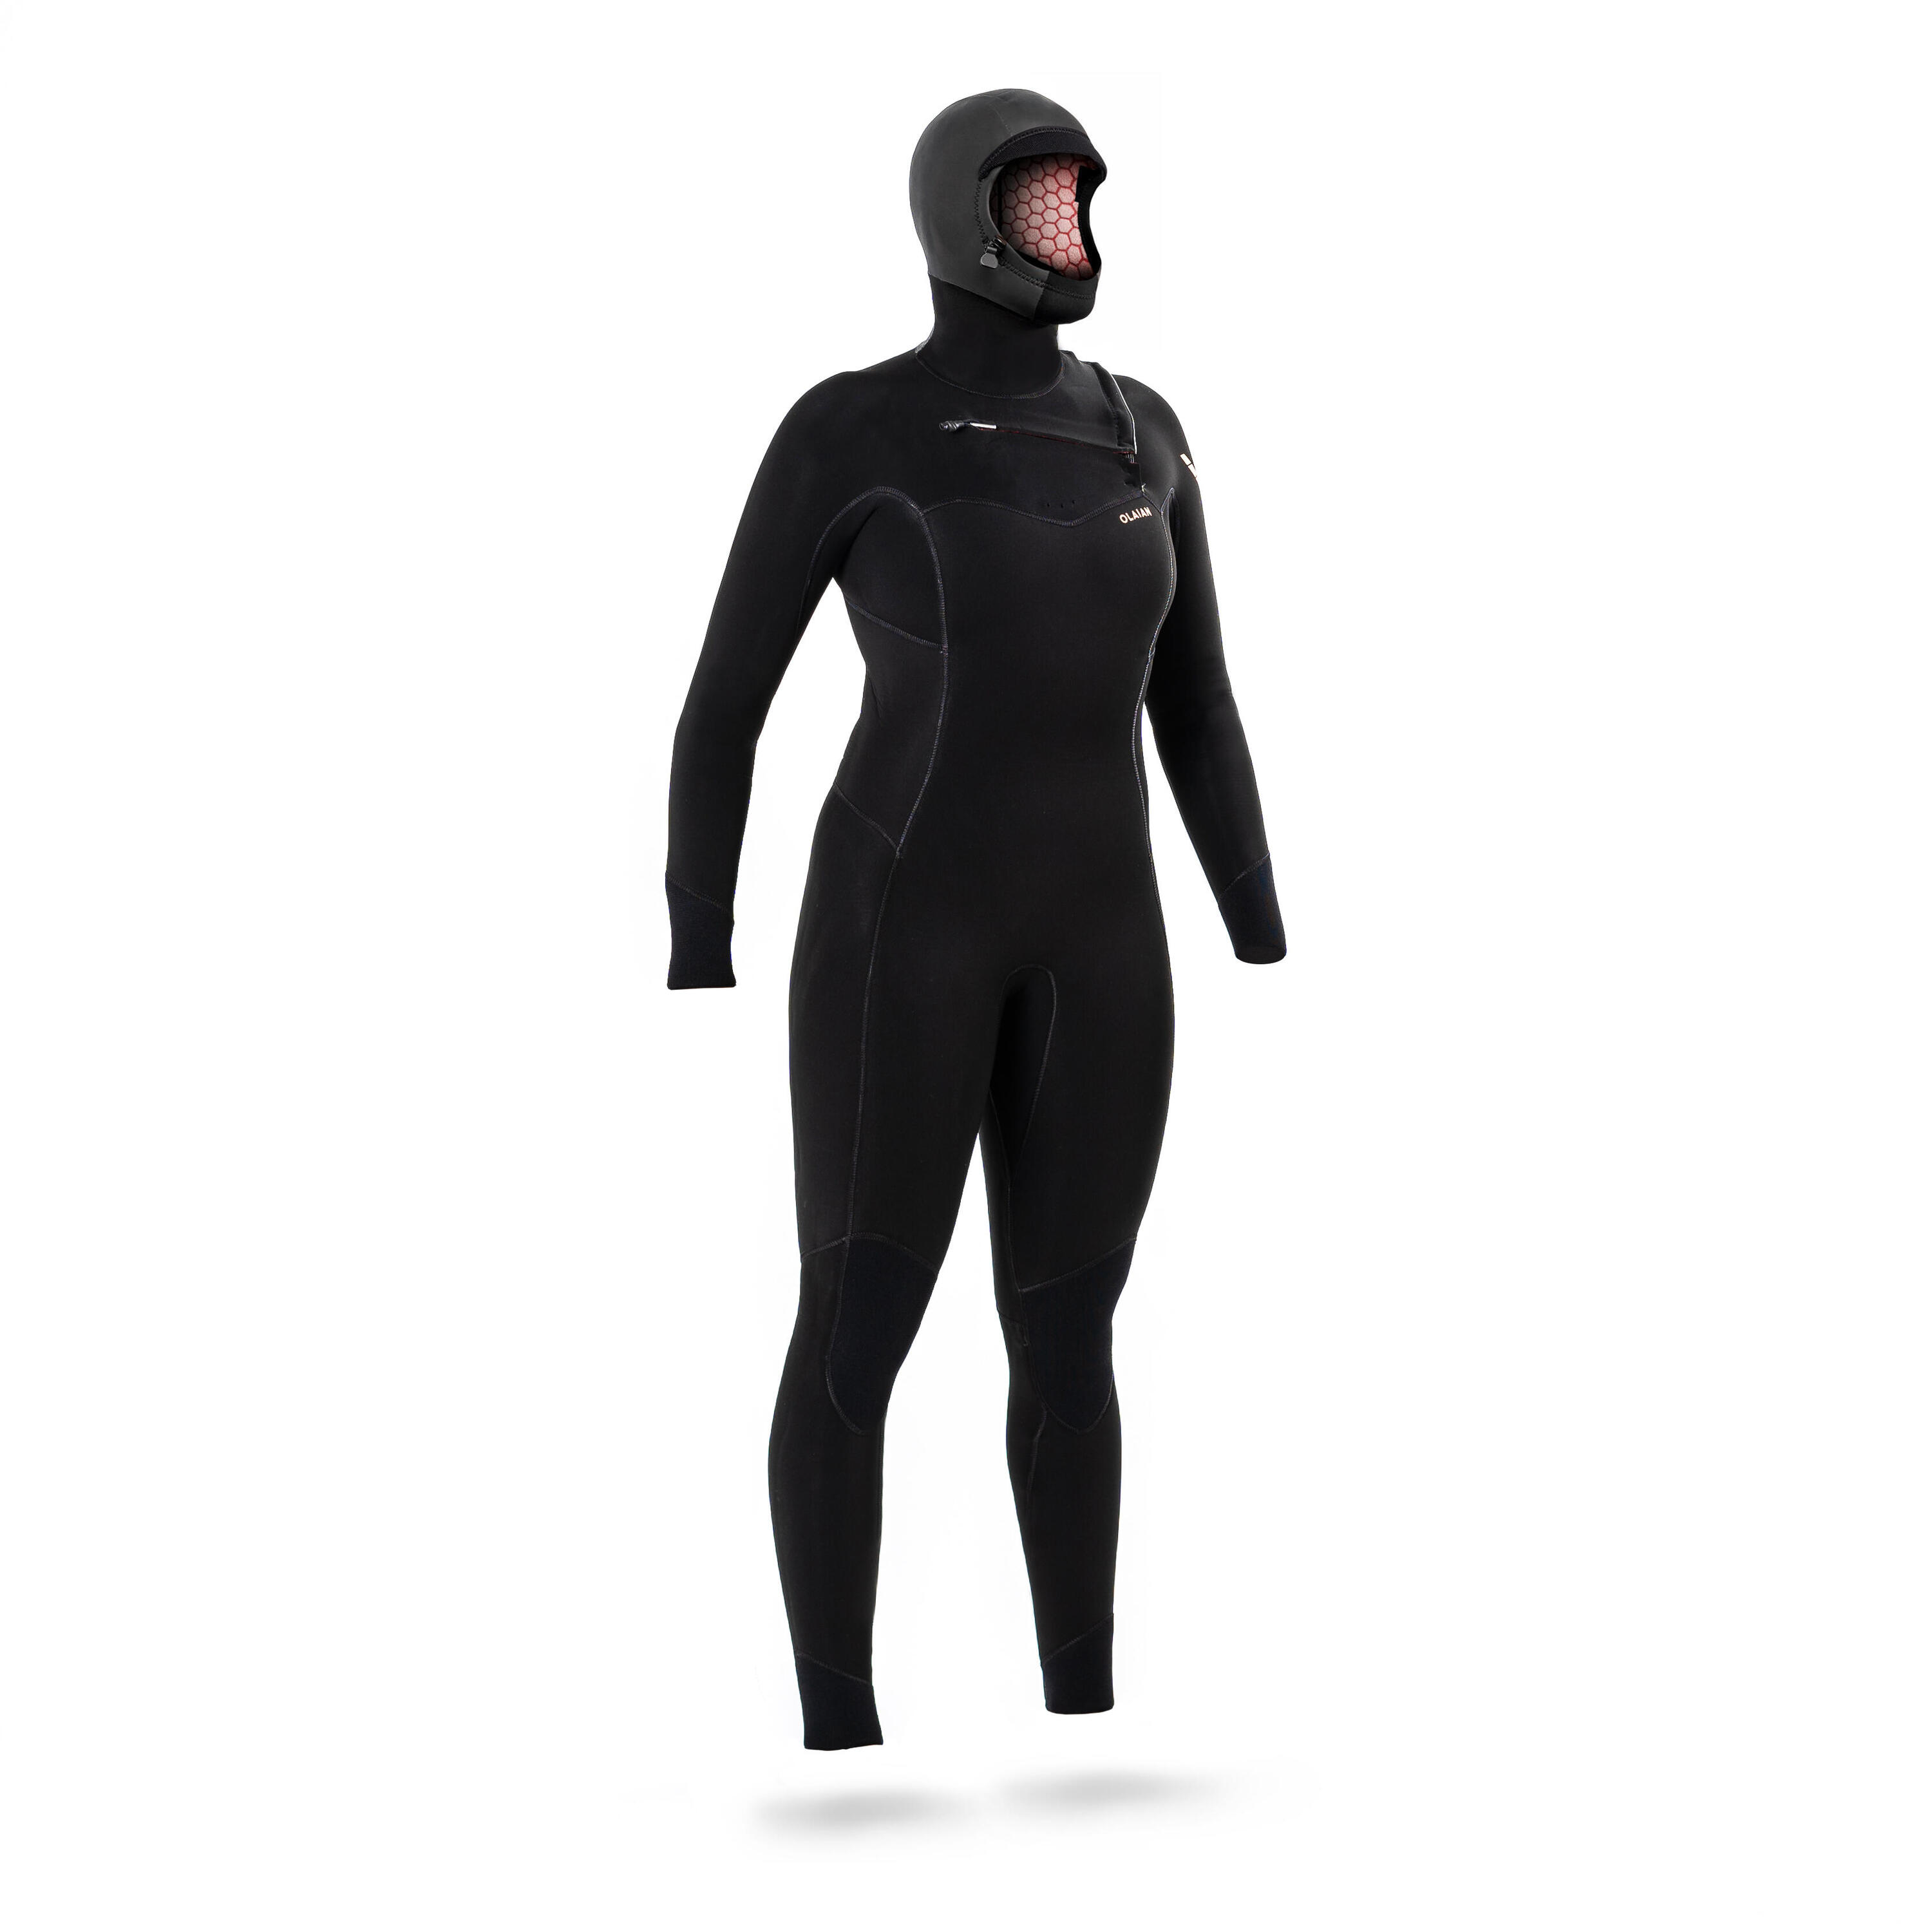 OLAIAN Women's Advanced Surfing 5/4 Neoprene Diving Suit with Hood and Chest Zip 